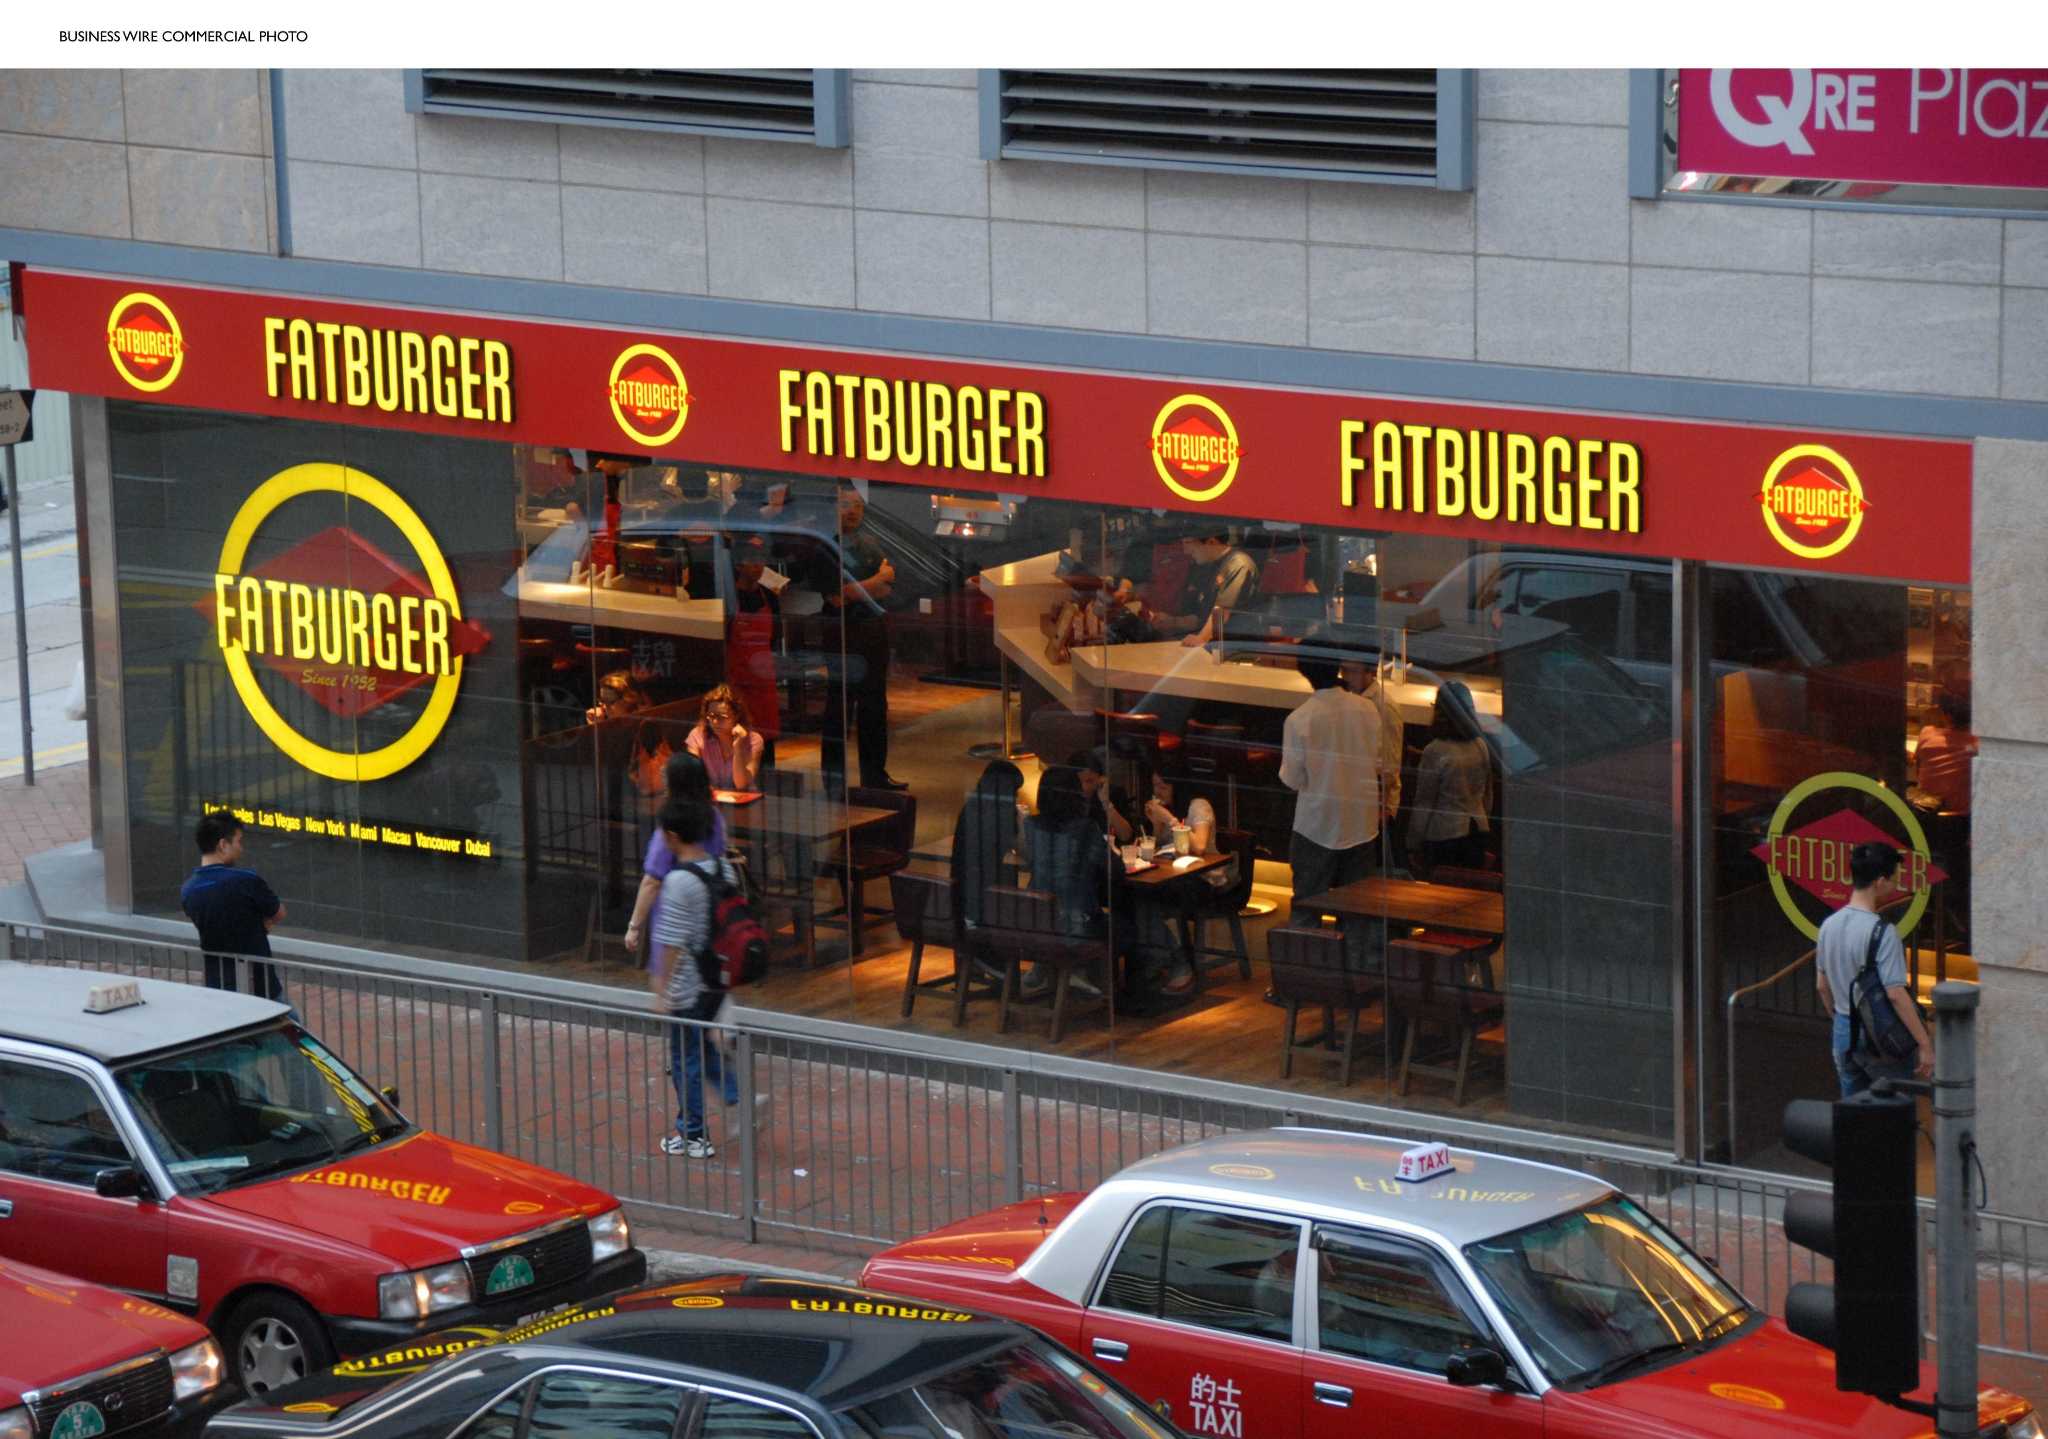 Want to own a piece of Fatburger? You may soon be able to